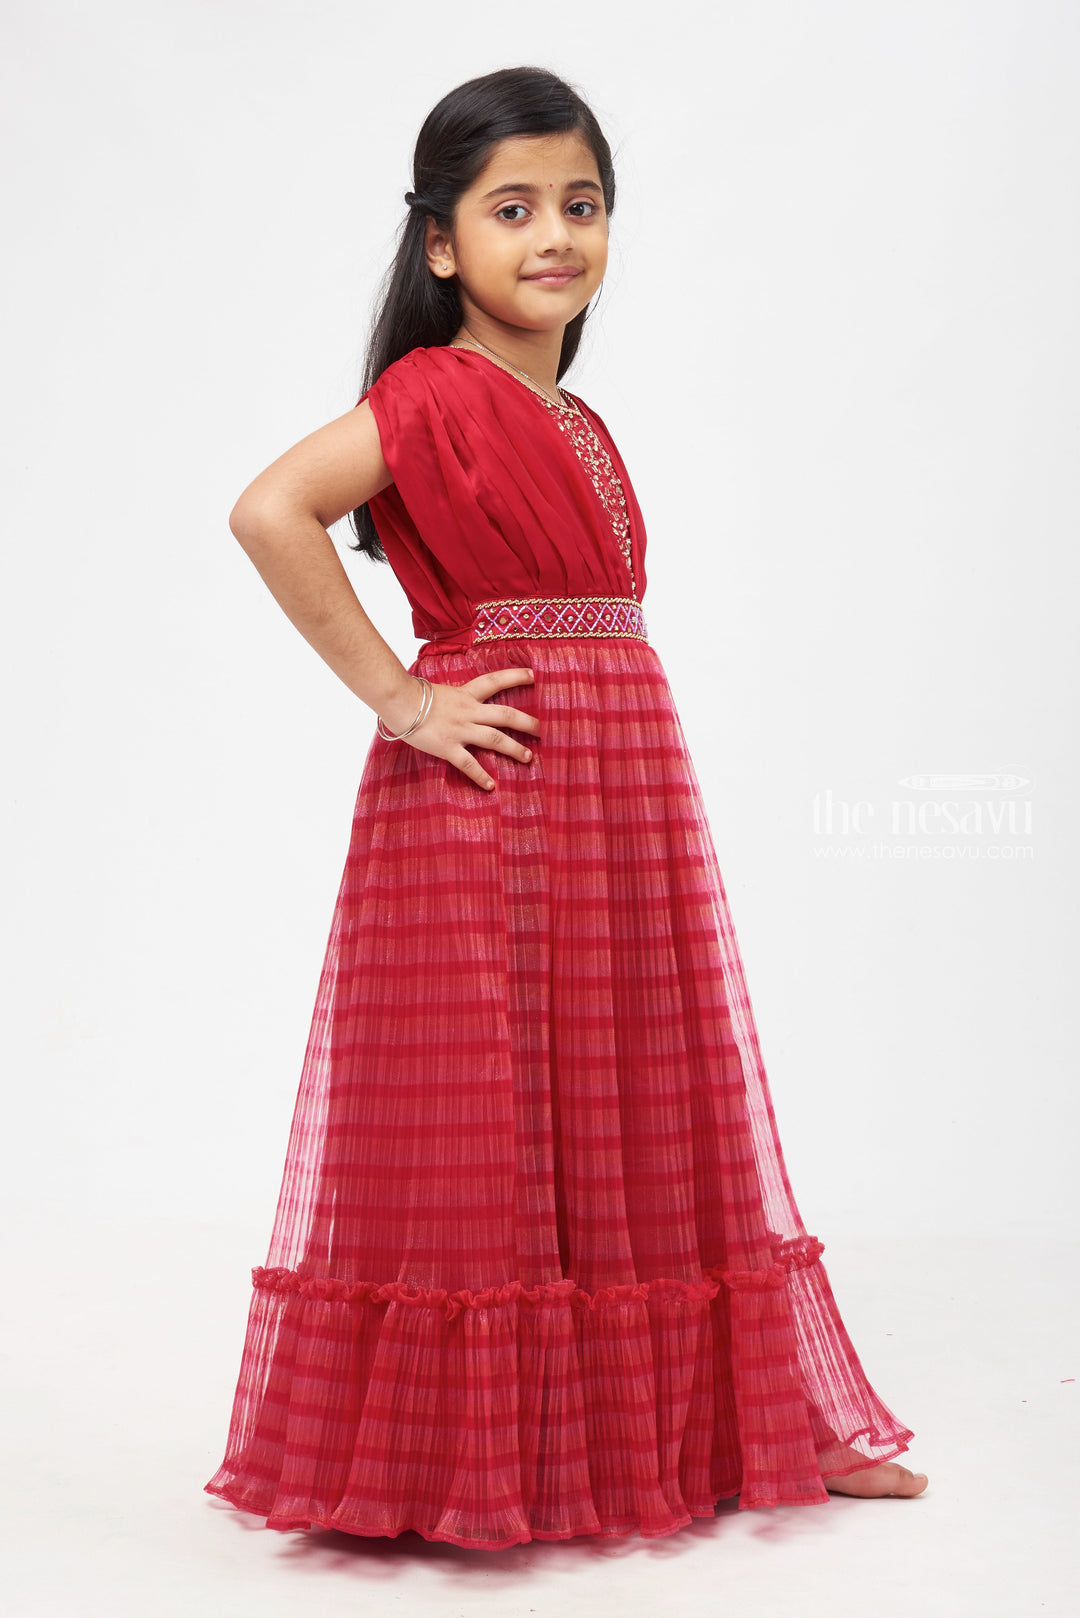 The Nesavu Girls Party Gown Dazzling Mirror Stone Embroidered Pleated & Striped Pattern Red Anarkali Gown for Girls- Elegant Diwali Anarkali Dresses Nesavu Anarkali Embroidery Dress Designs | Festive Diwali Anarkali Outfits | The Nesavu